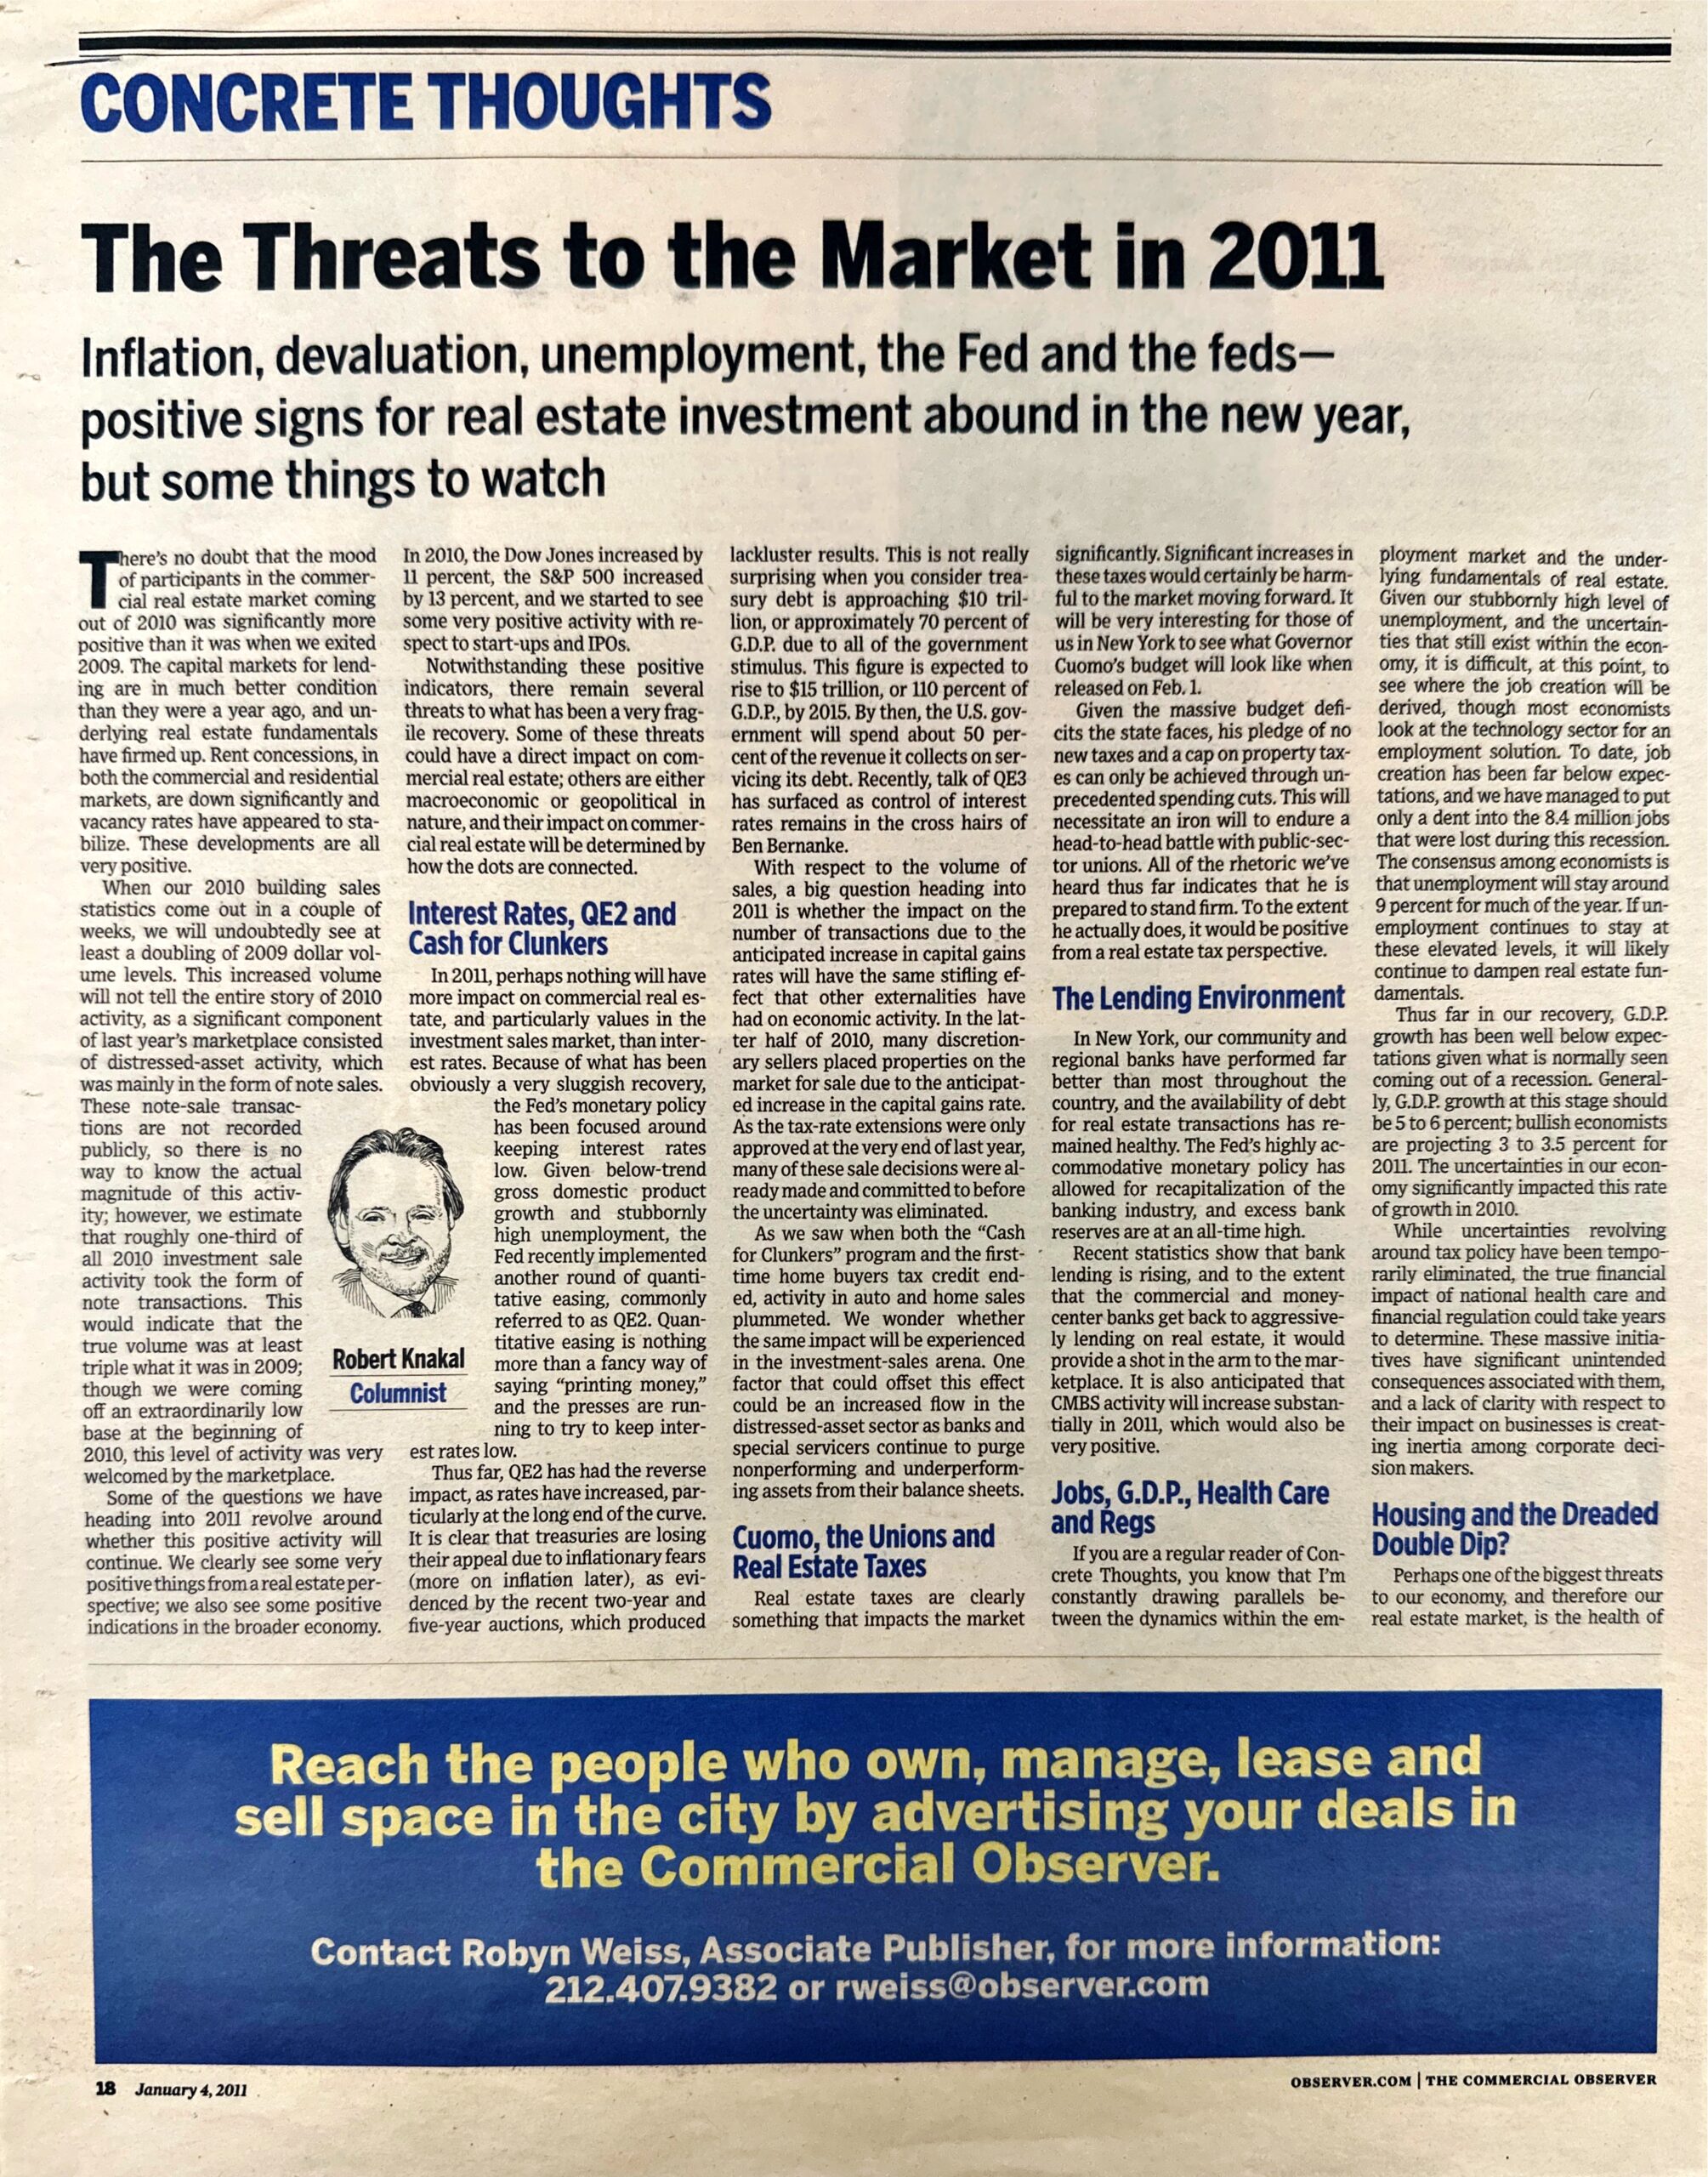 1-4 Concrete Thoughts - The Threats to the Market in 2011_Page_1